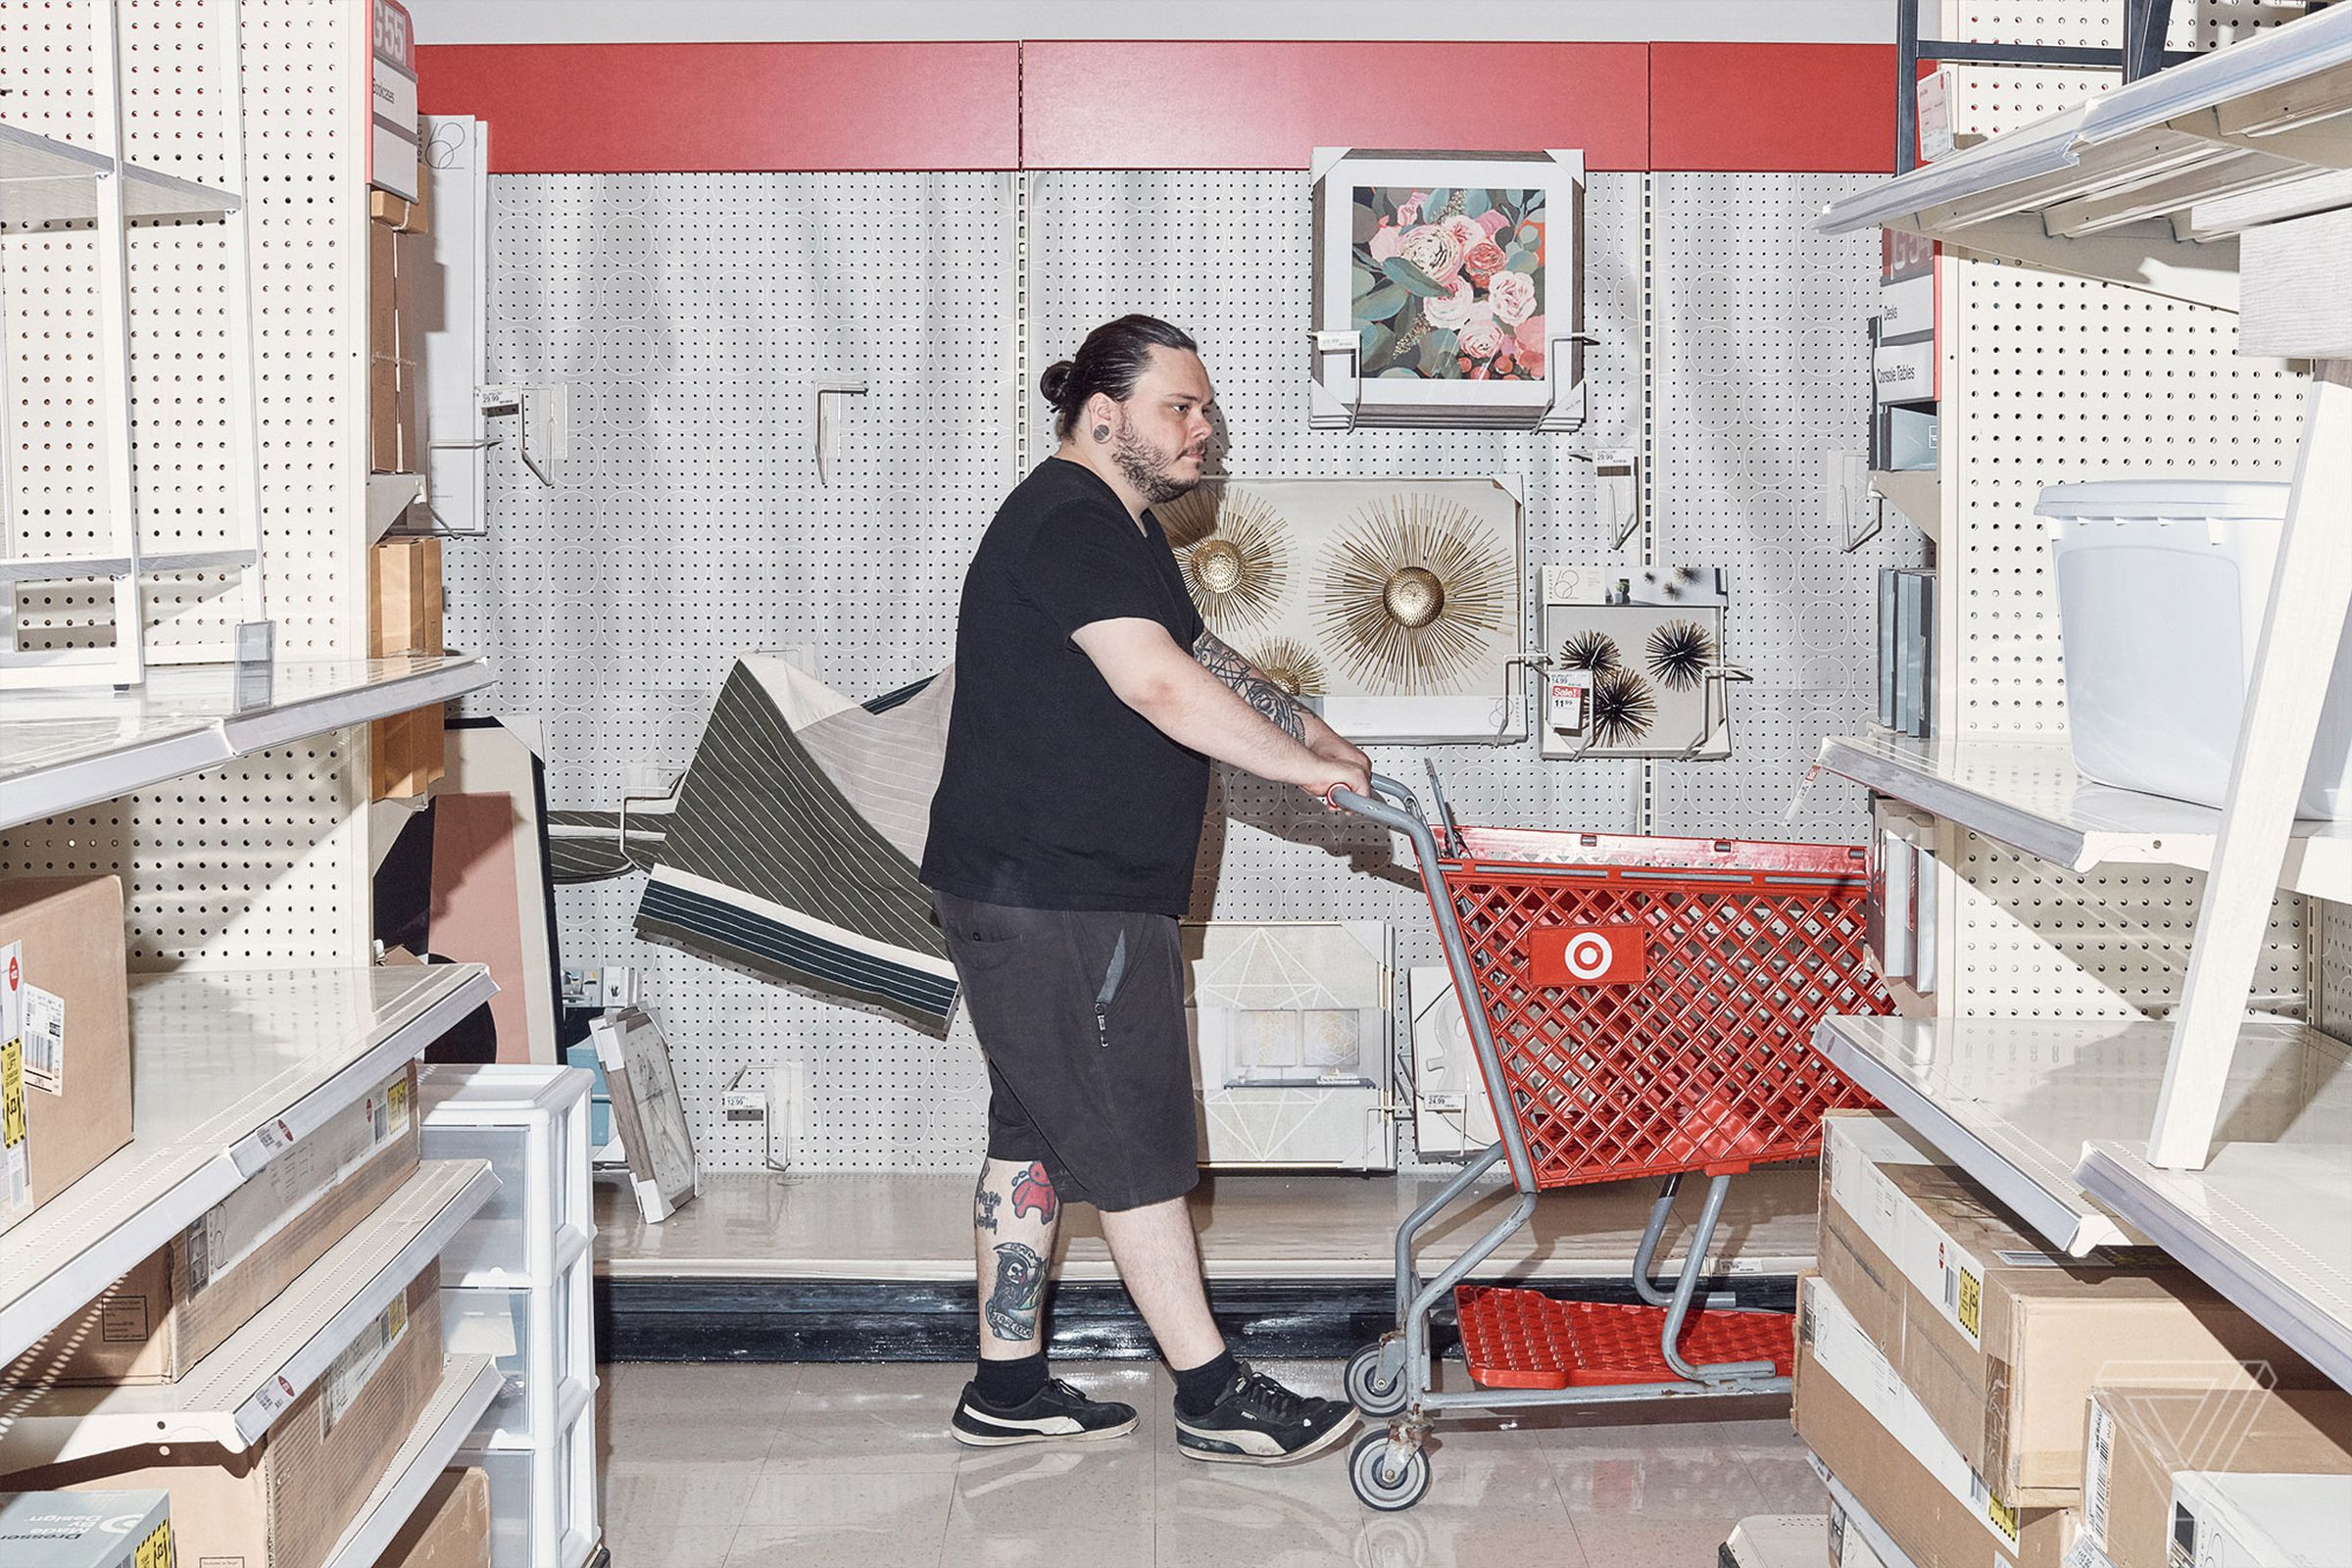 Chris Anderson shops at a Target location in West Mifflin, Pennsylvania.